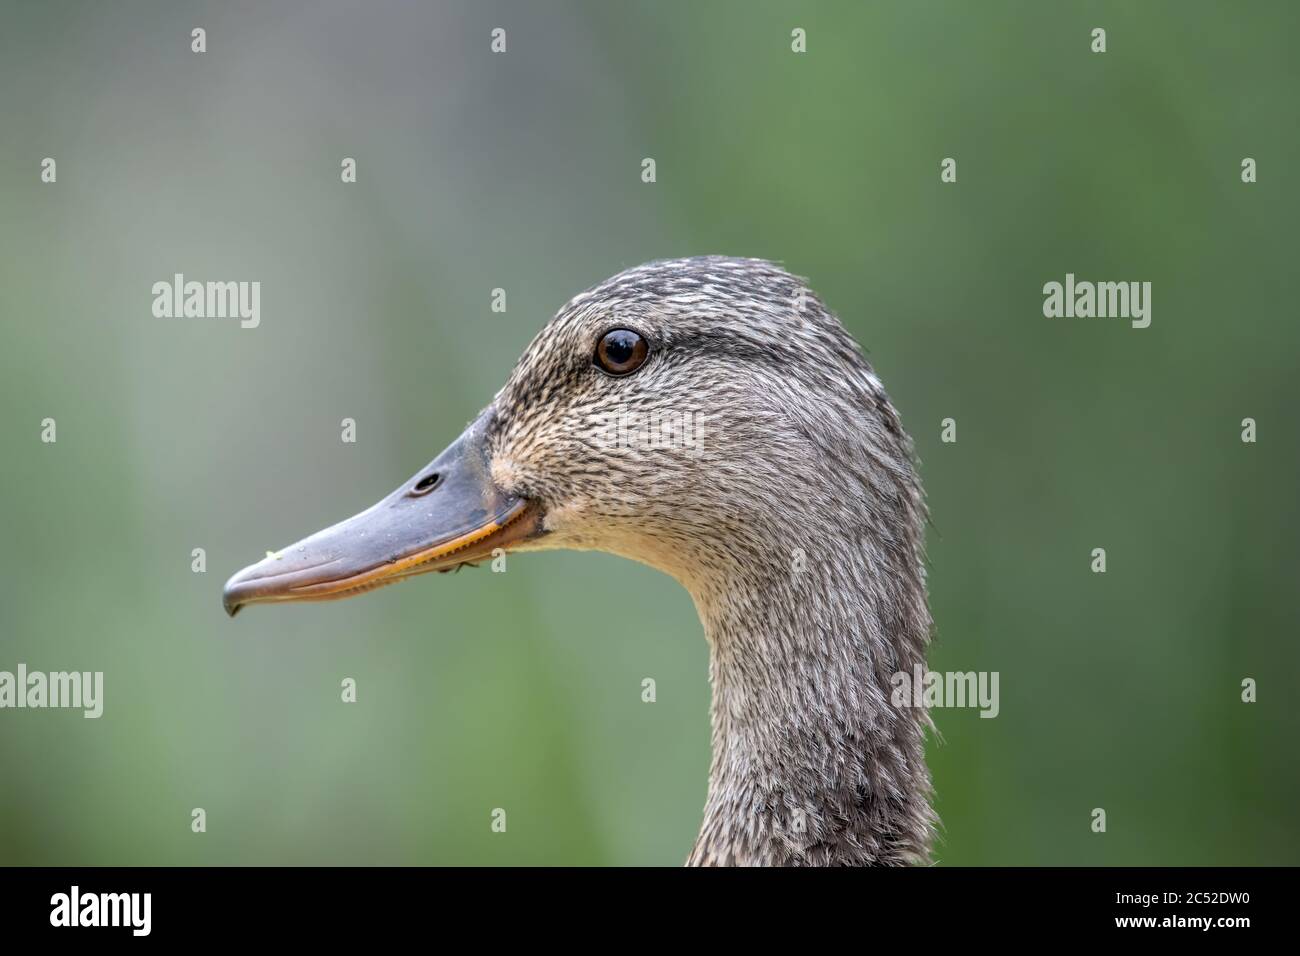 Close-up profile view of a female Mallard's face, with a green background. Specks of vegetation from the lake can be seen on her beak. Stock Photo